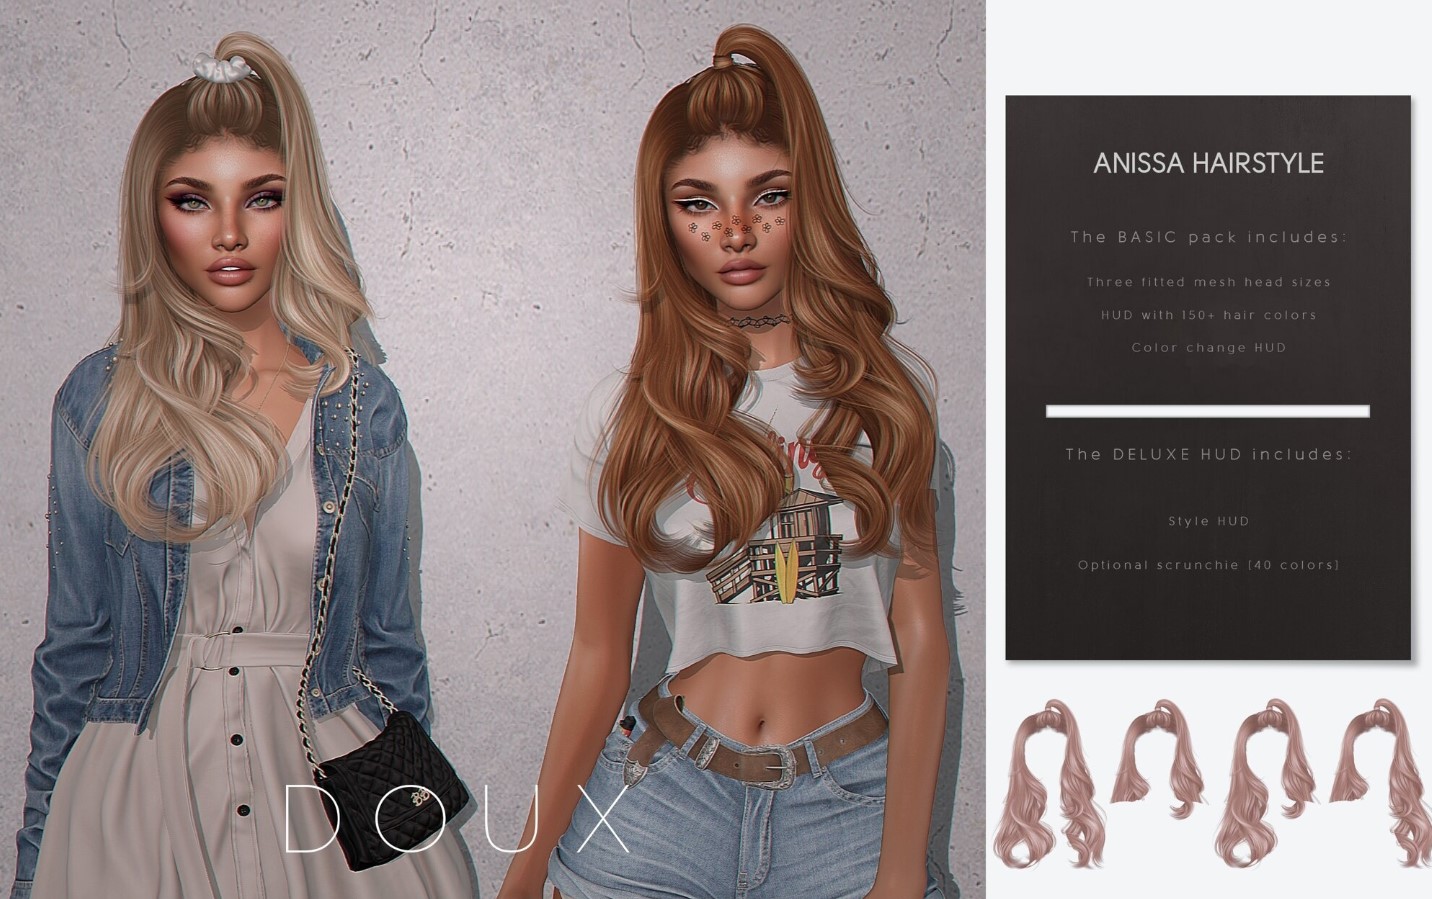 DOUX - Anissa hairstyle - Hairstyles / Patreon Exclusives - Exclusive ...